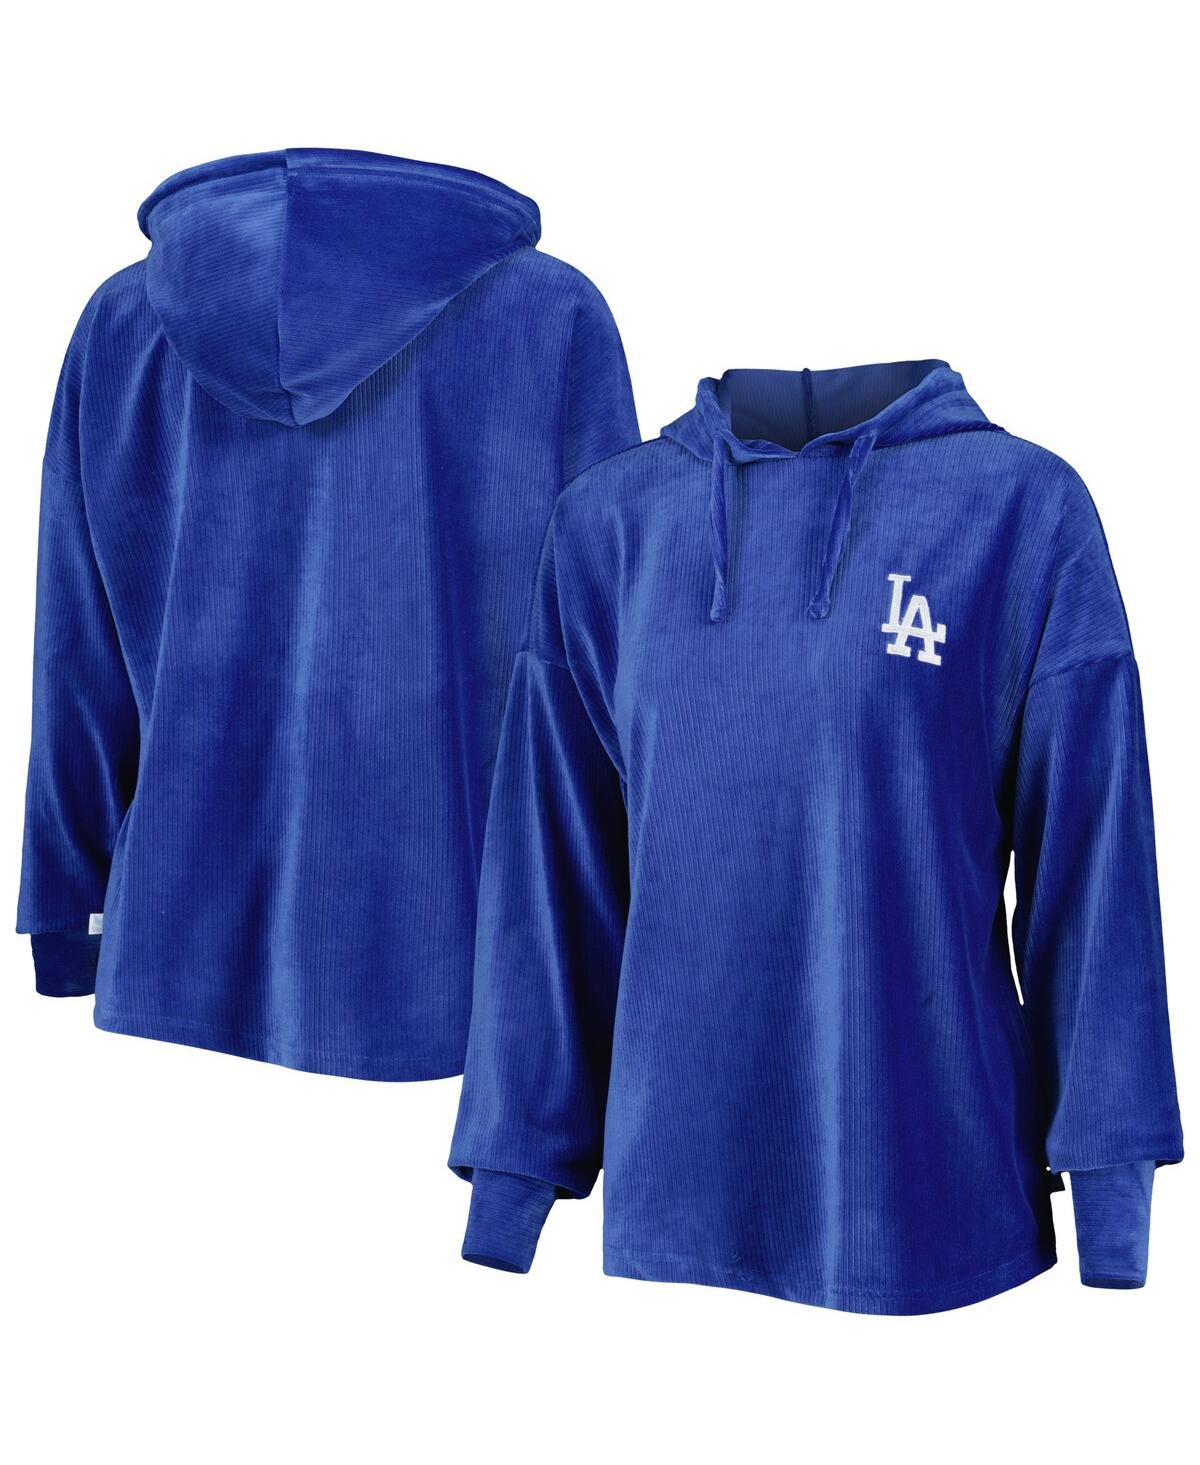 Touché Women's Touch Royal Los Angeles Dodgers End Line Pullover Hoodie